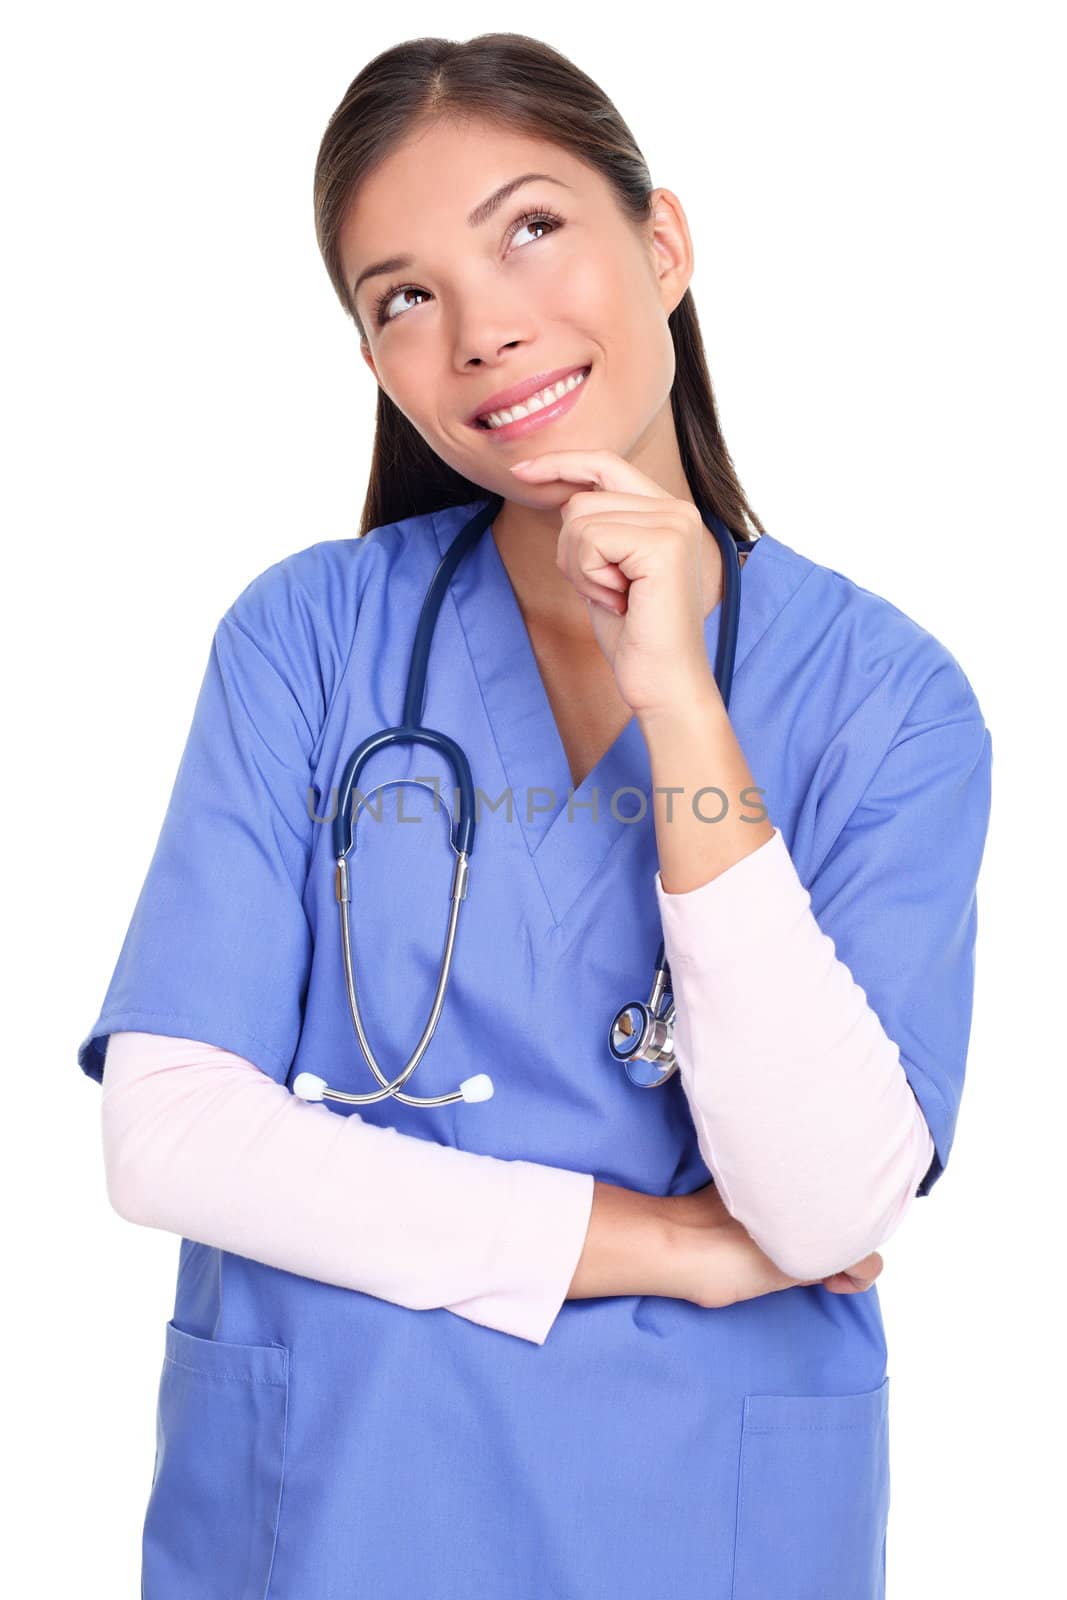 Thinking nurse or medical professional in blue scrubs pondering looking up to the side isolated on white background. Woman model in her twenties.